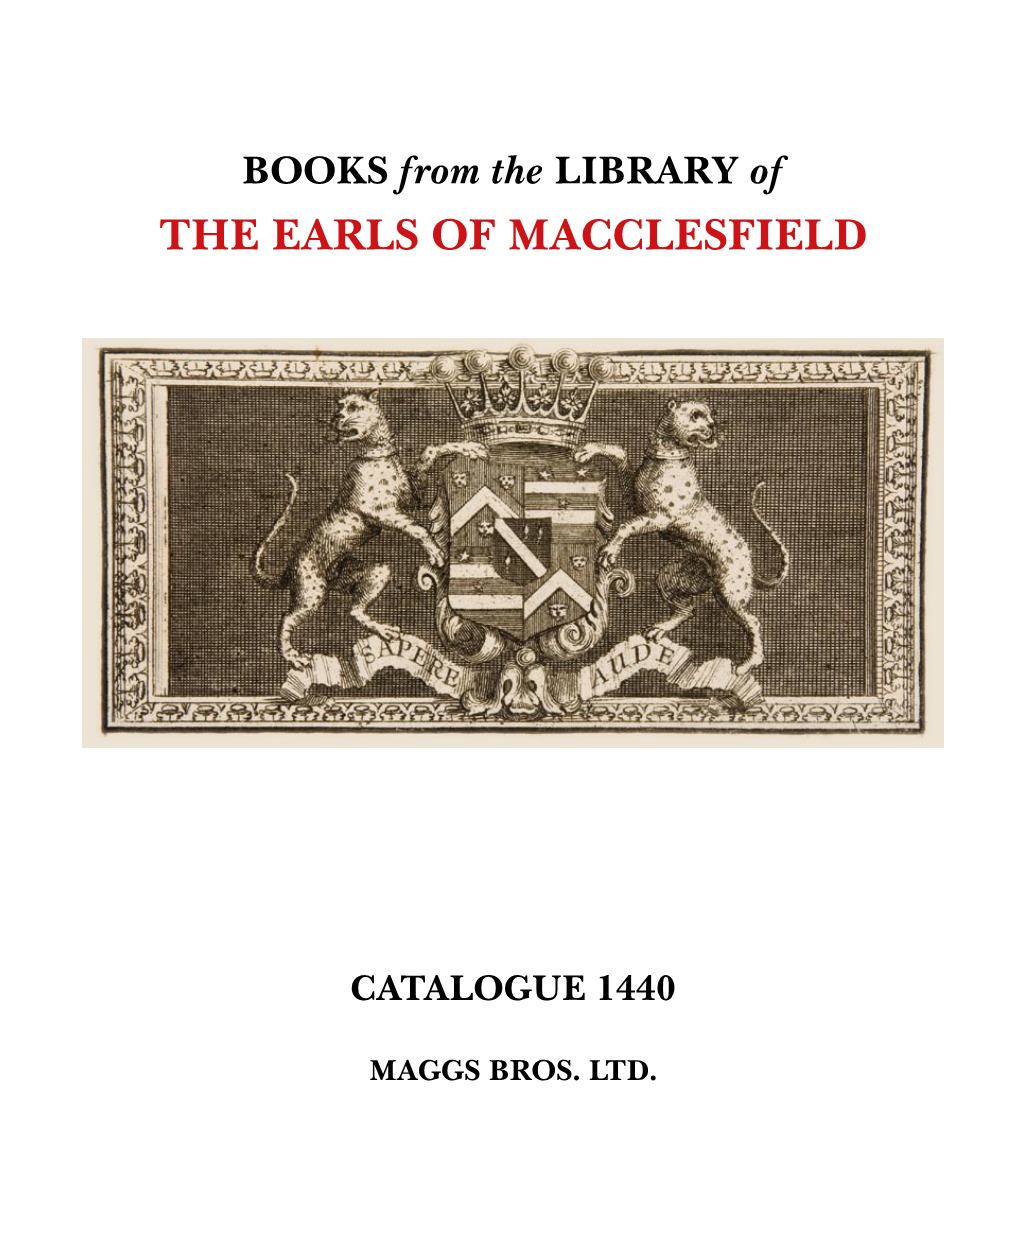 BOOKS from the LIBRARY of the EARLS of MACCLESFIELD